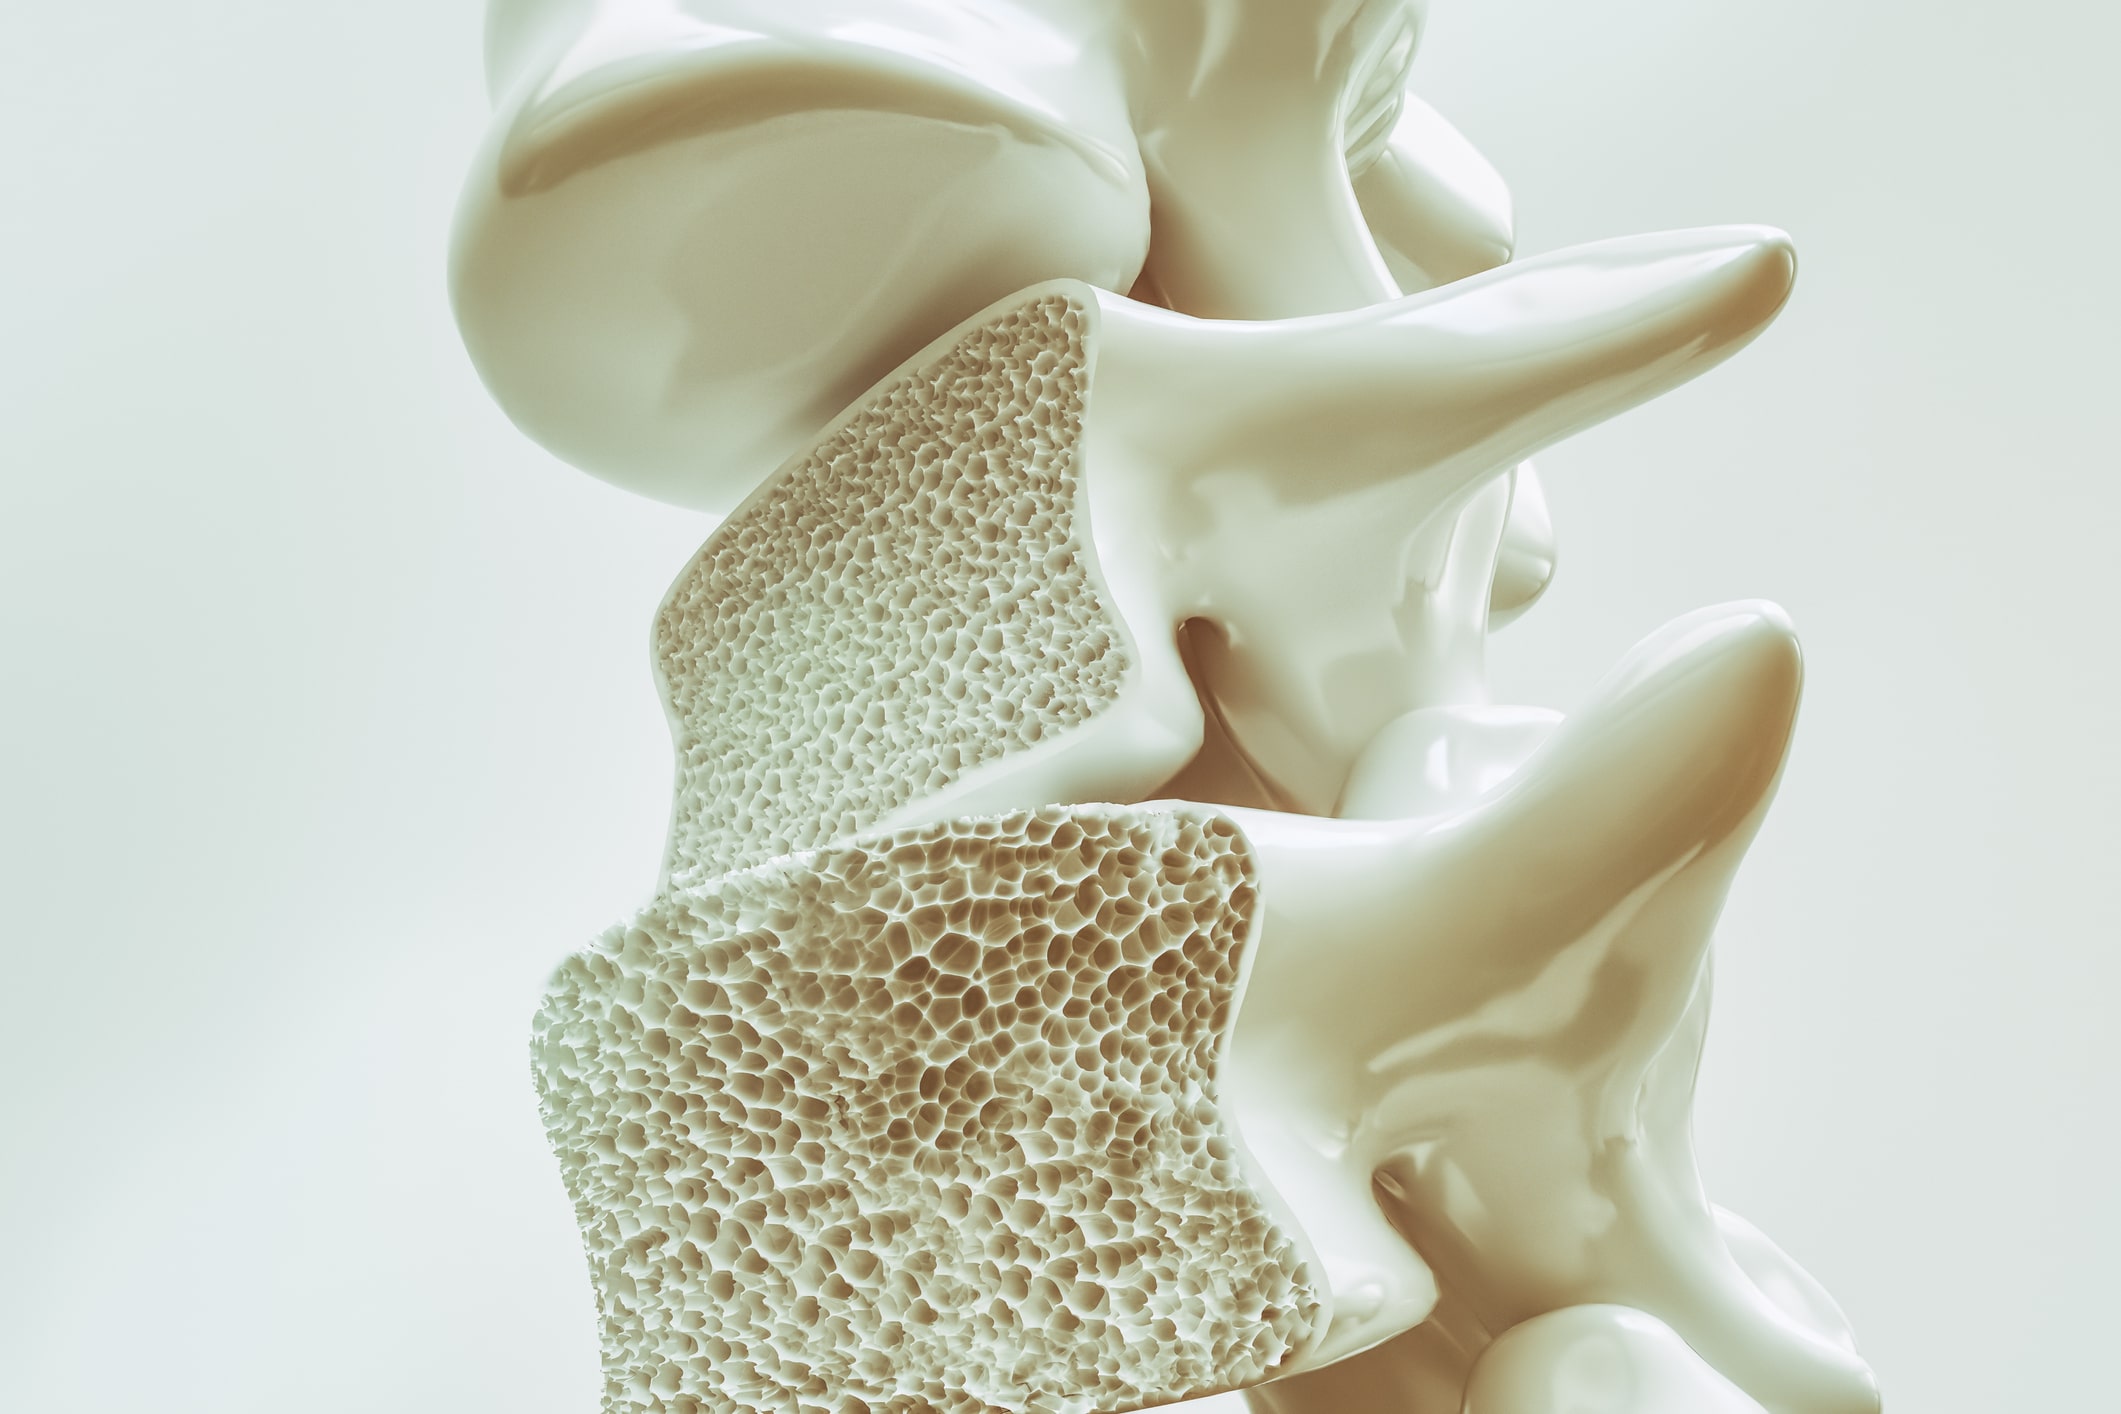 Radical New Treatment for Osteop...